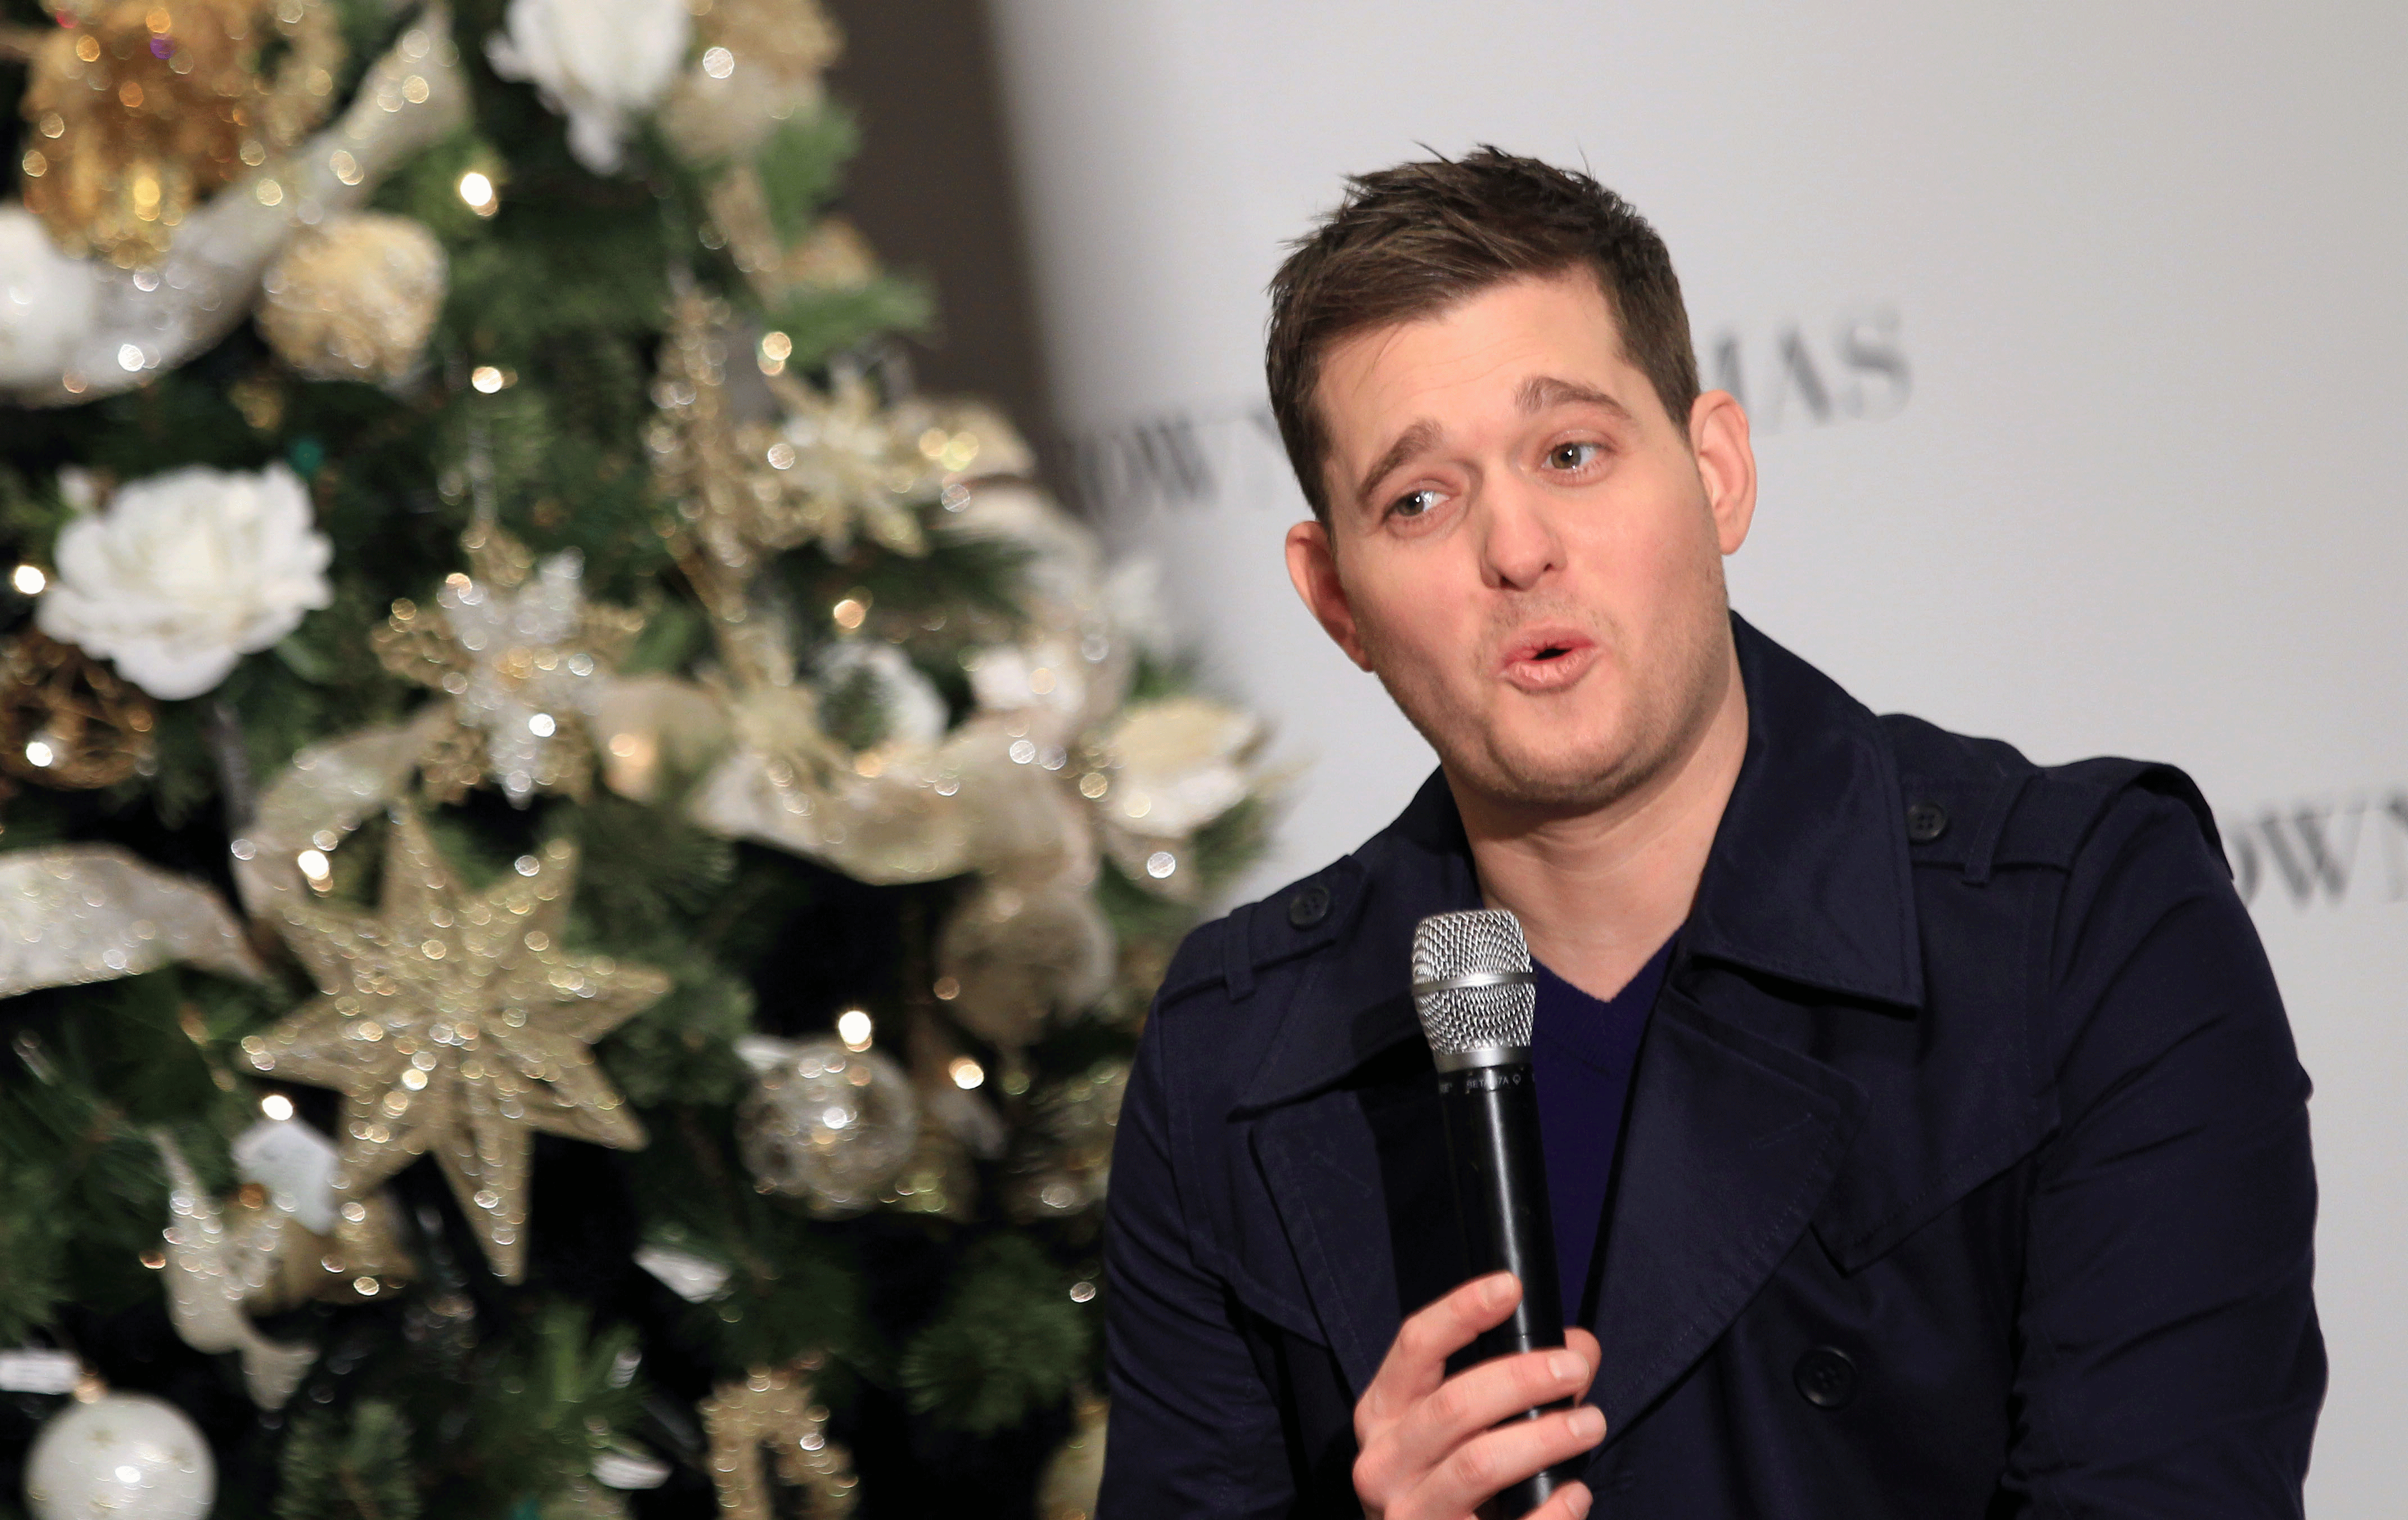 003-buble--and---tree133293.gif 